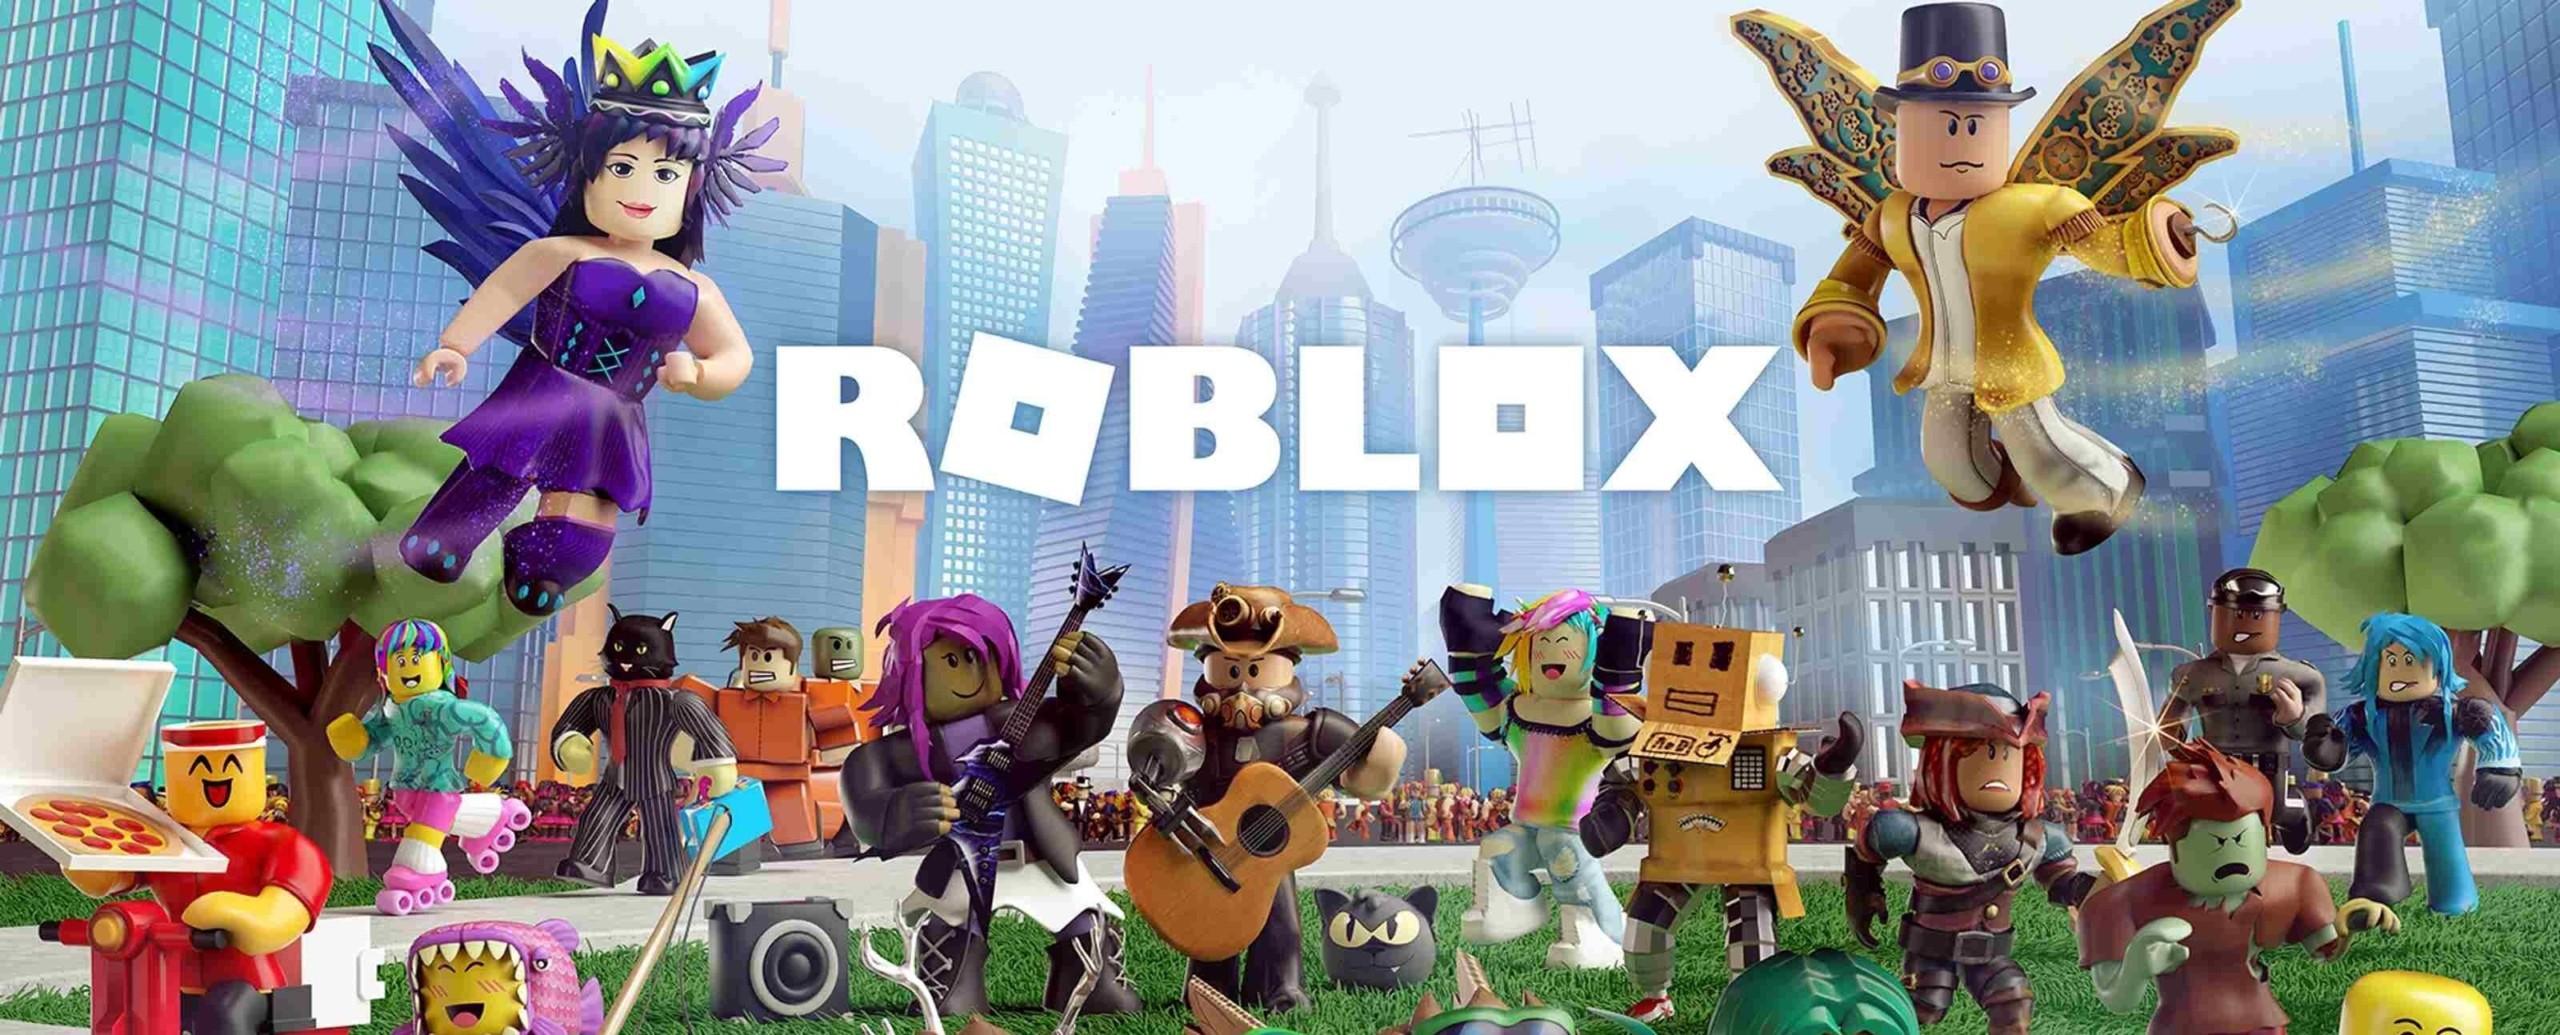 Roblox models not showing in Creator Marketplace or Roblox Studio